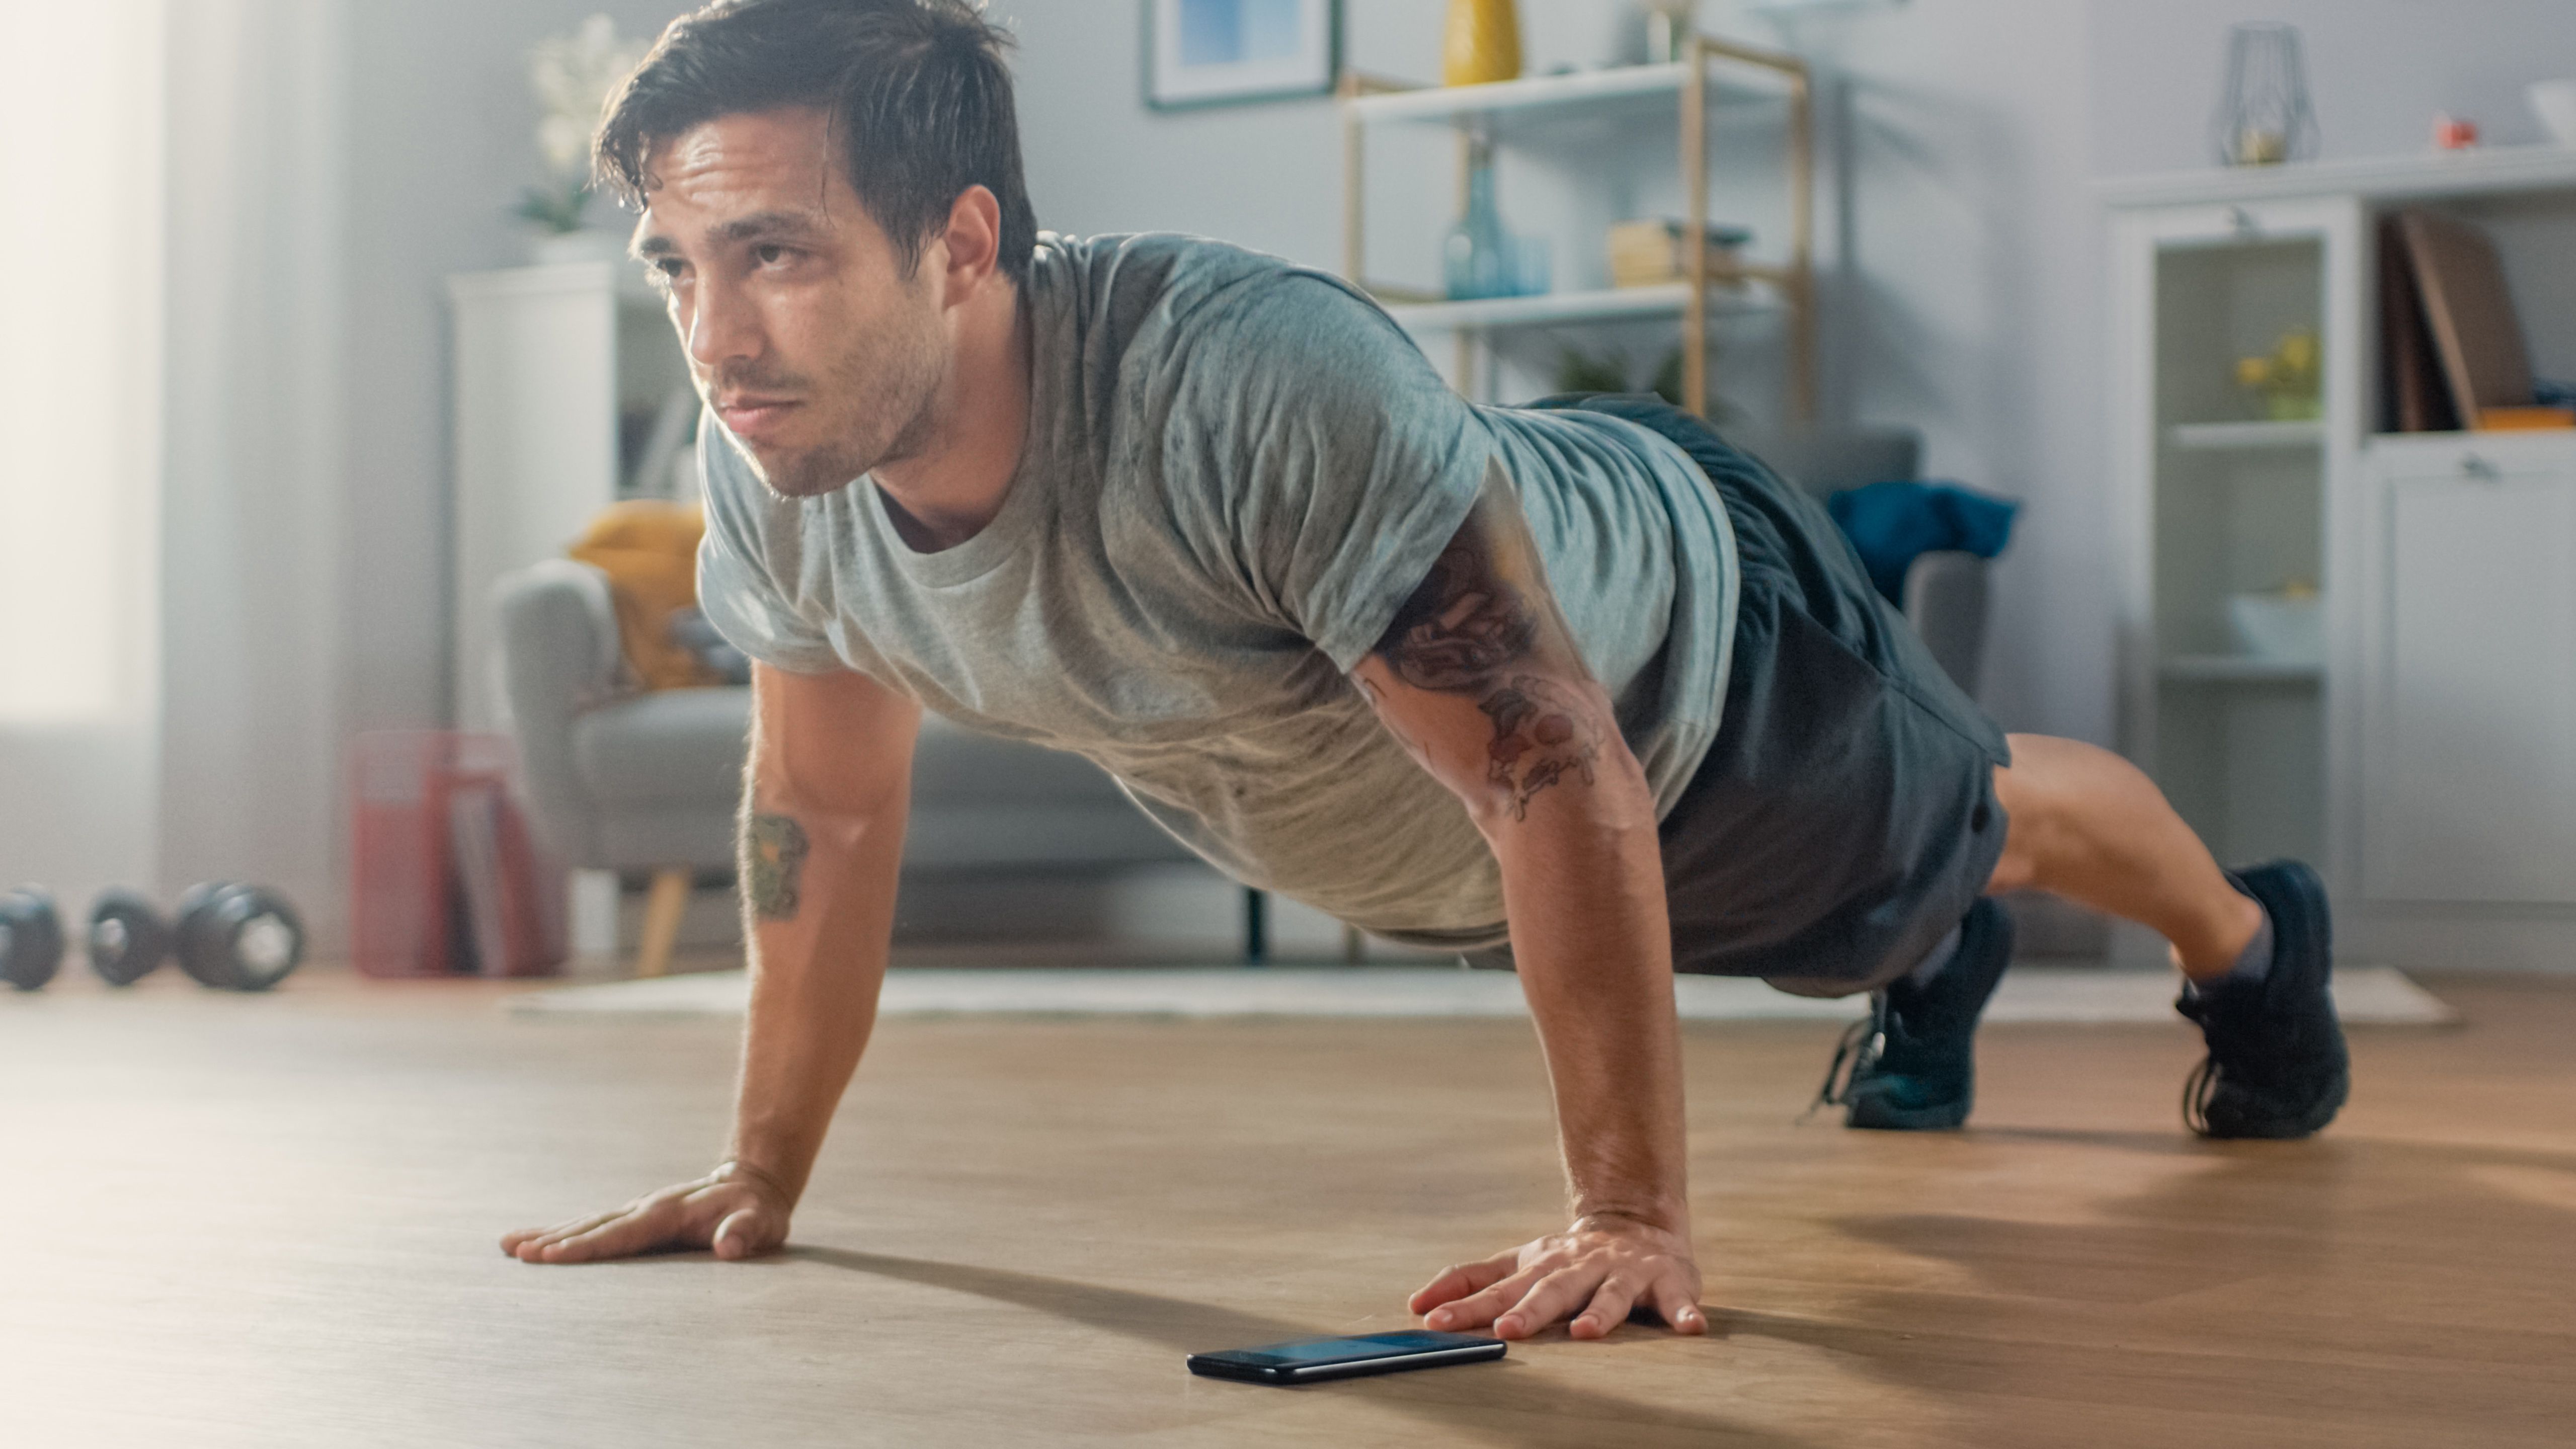 This Pushup Challenge Makes You Limit Smartphone Screen Time